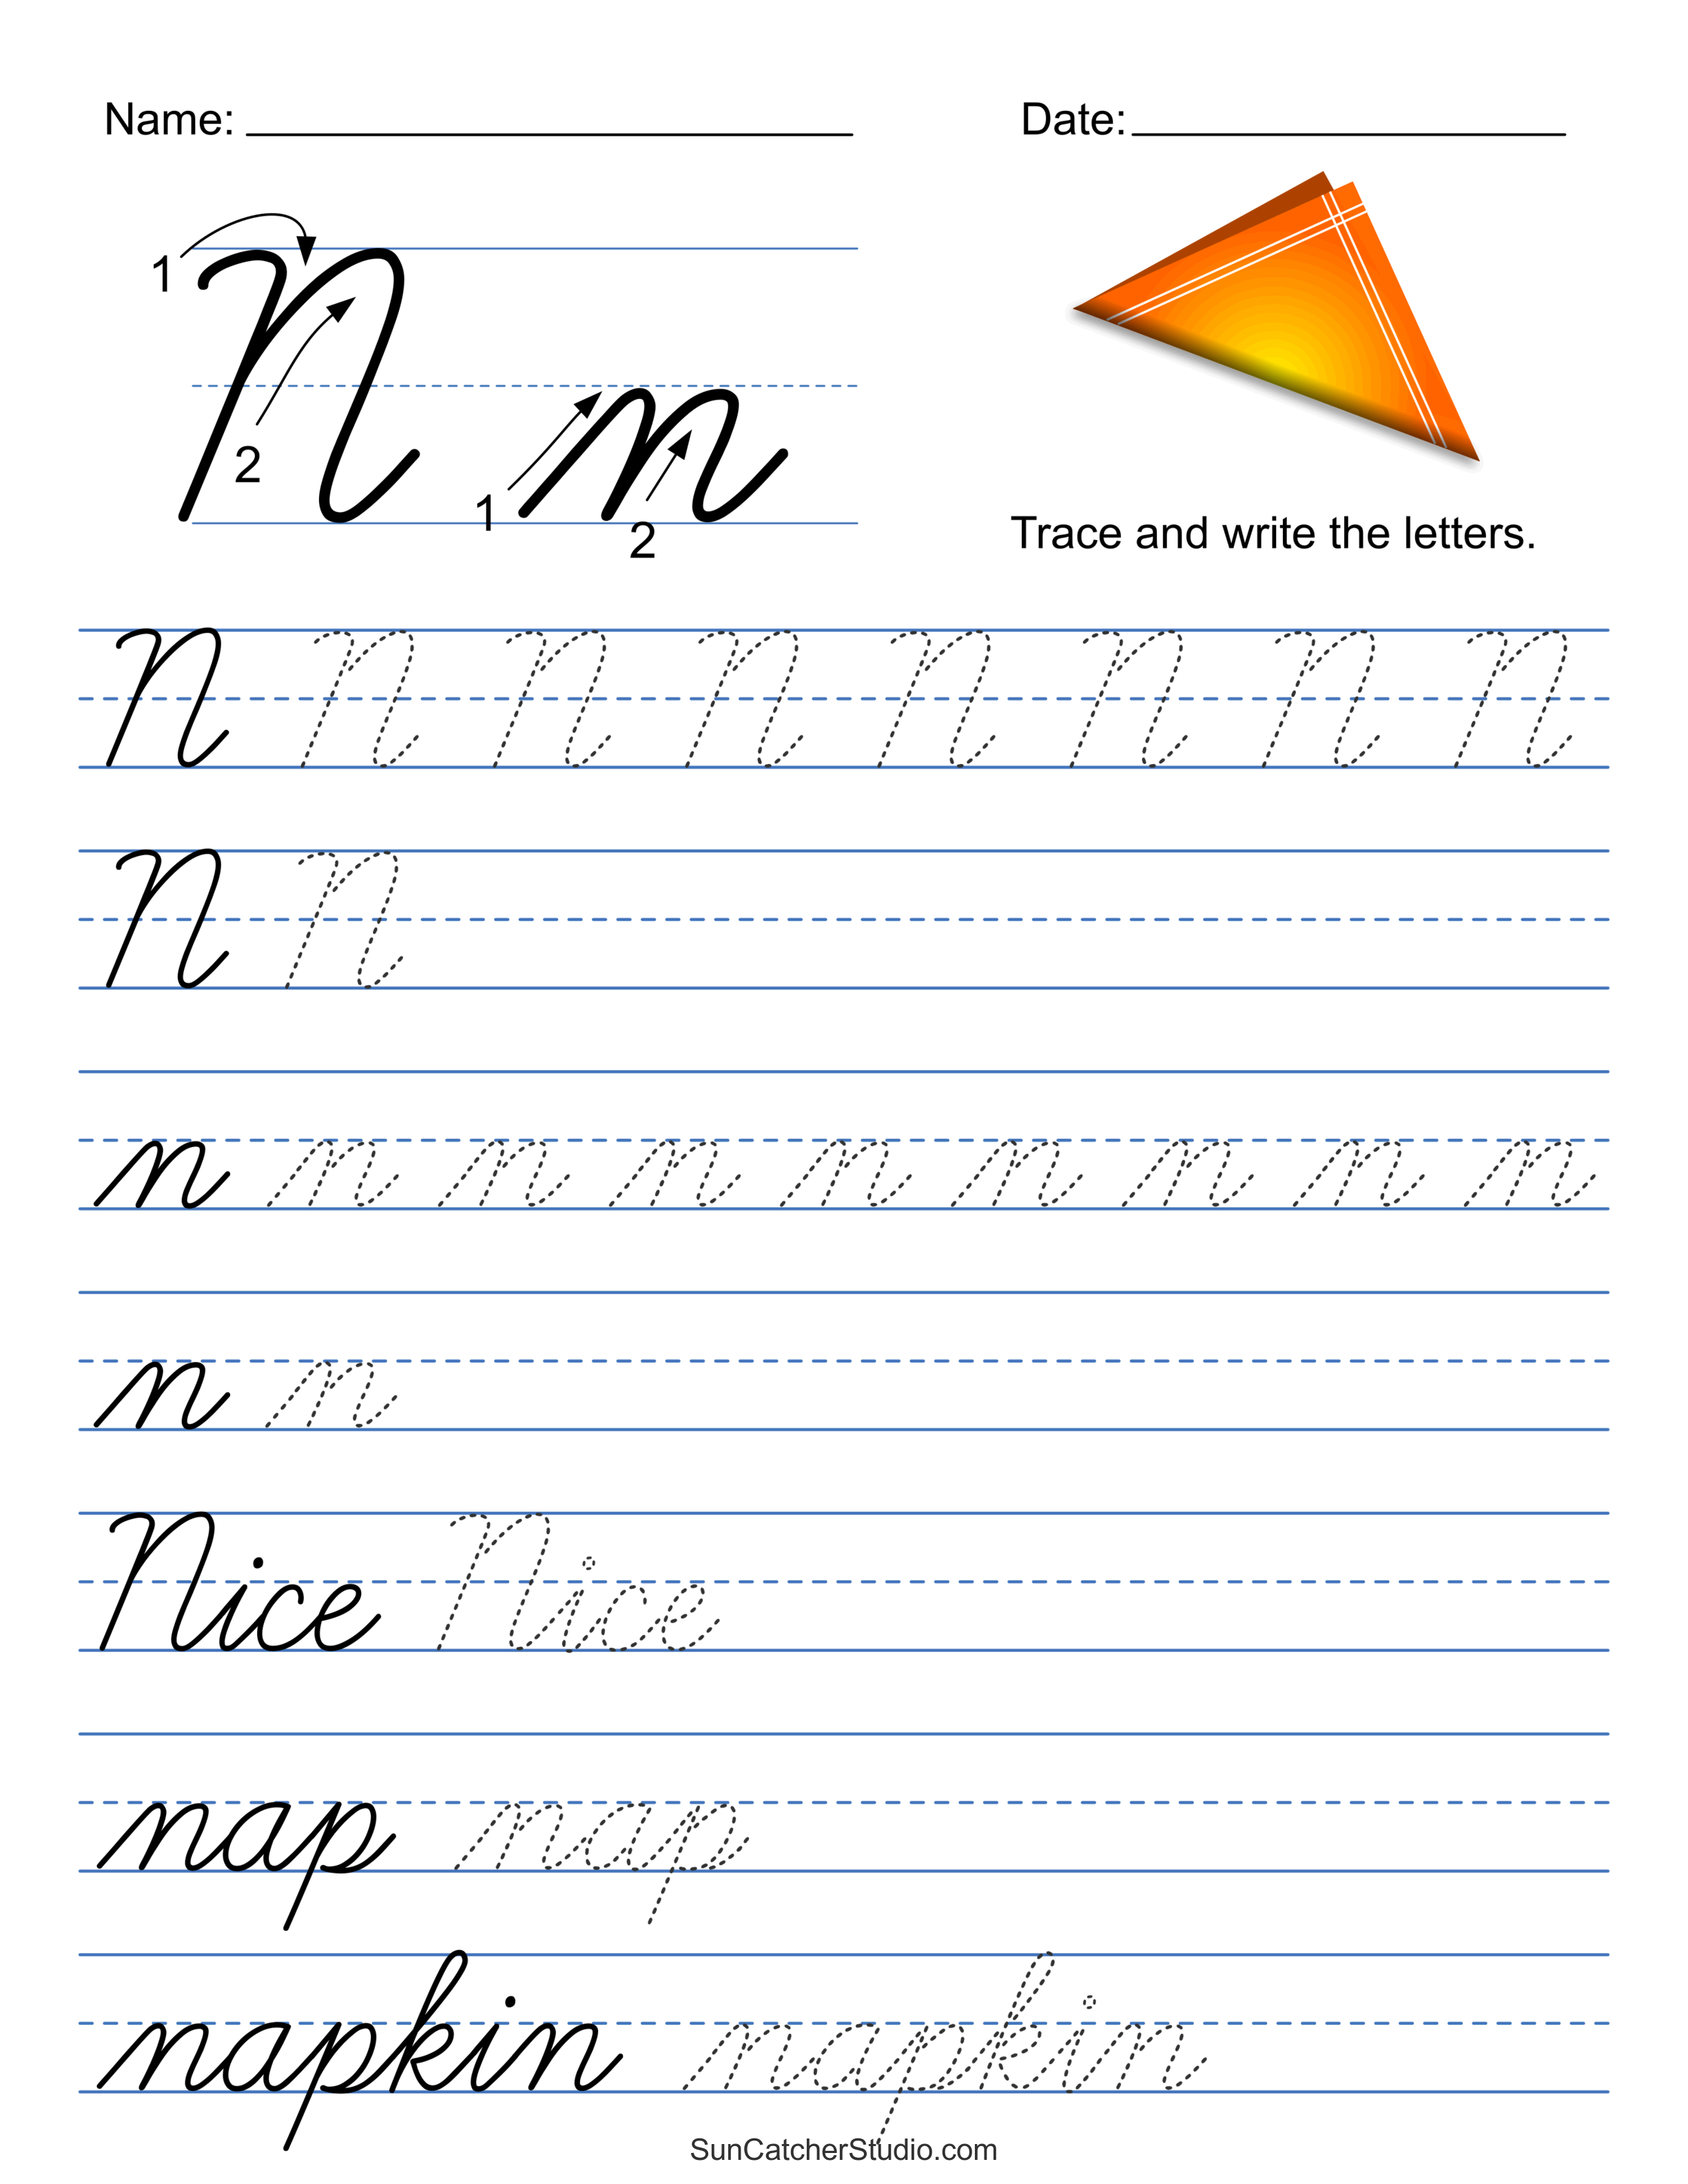 Printable Cursive Handwriting Worksheets Practice Letters DIY Projects Patterns Monograms Designs Templates